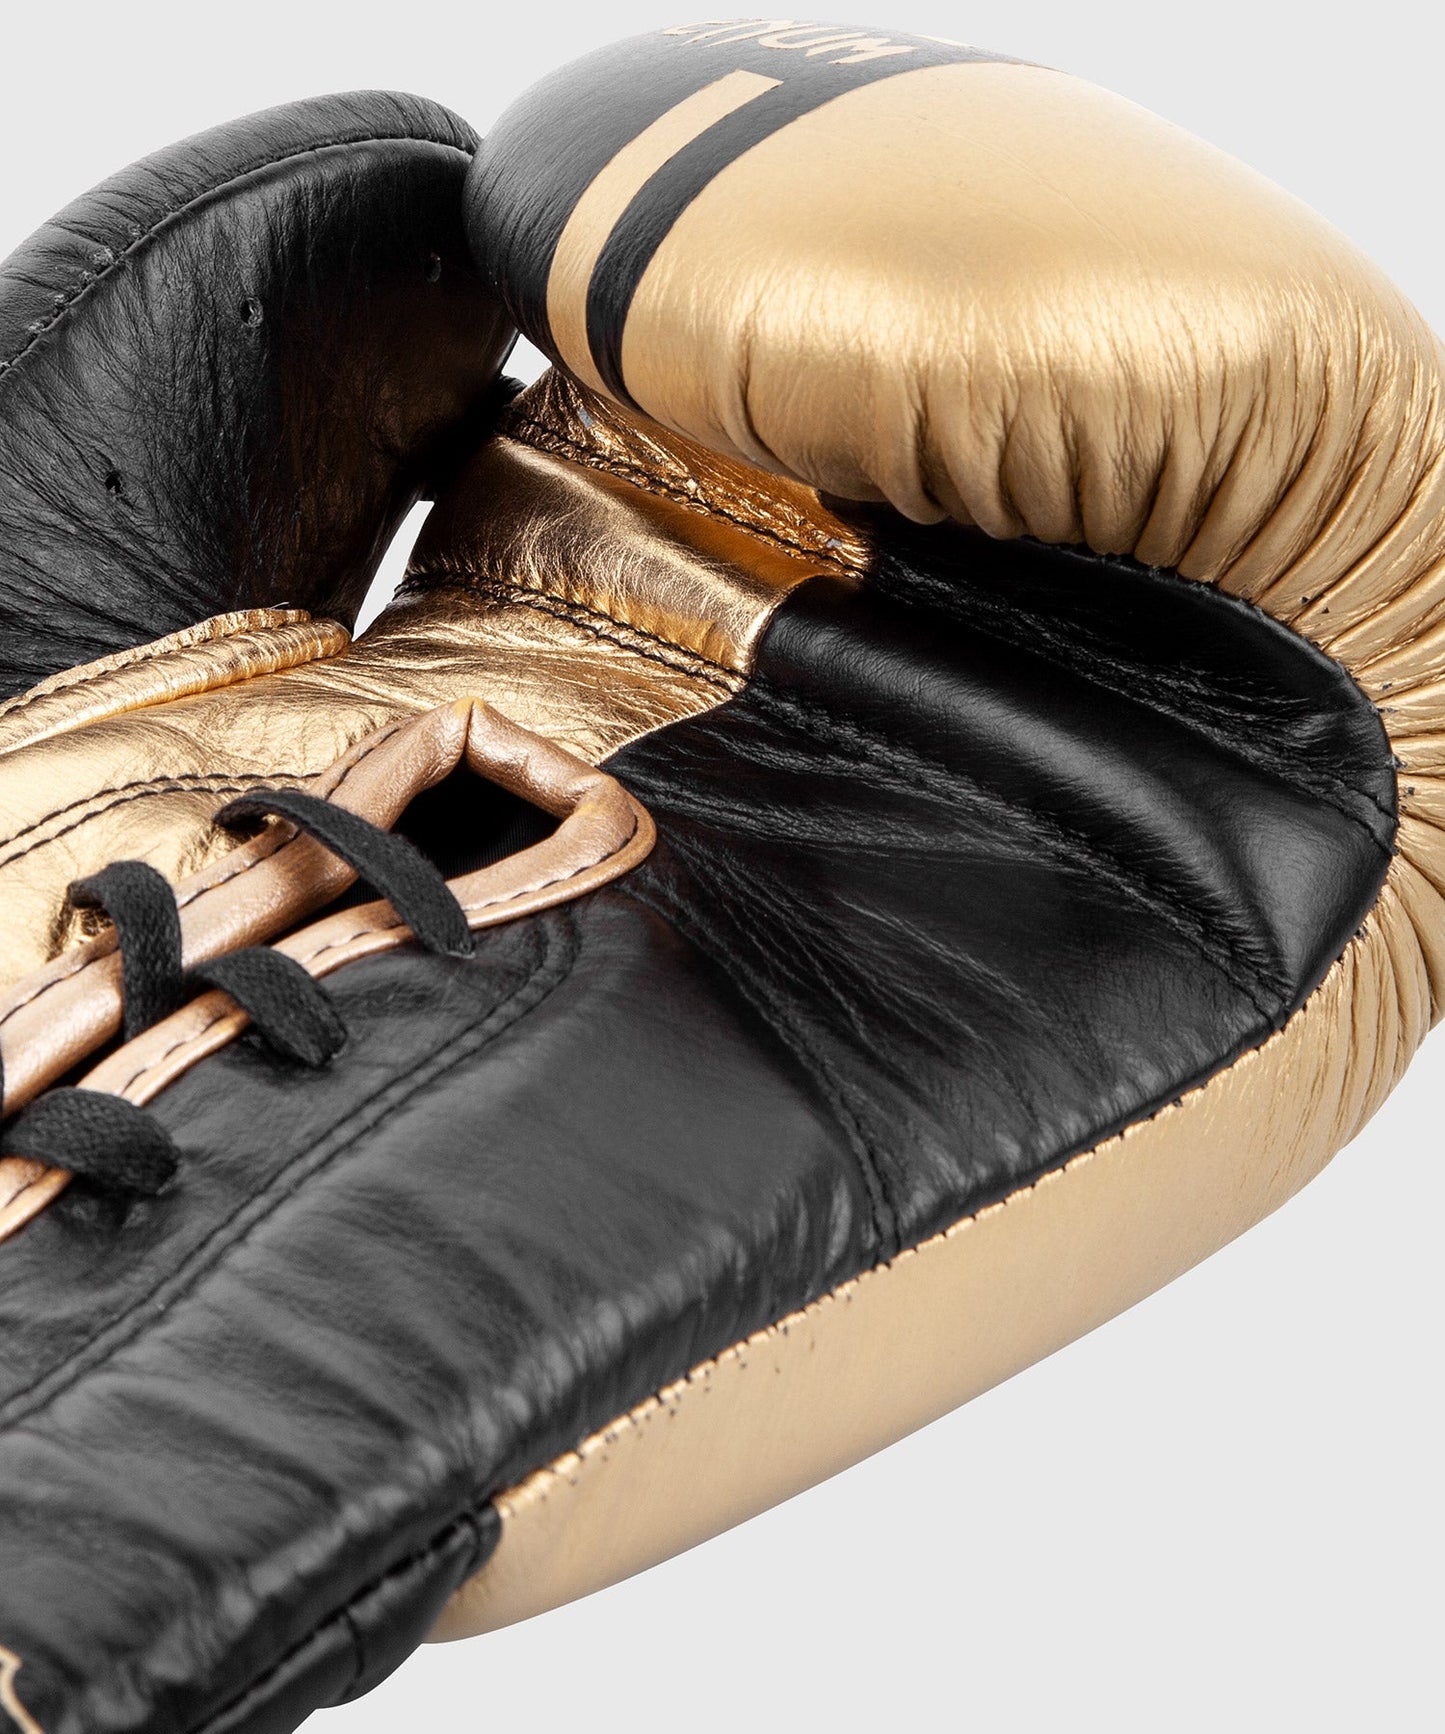 Venum Shield Pro Boxing Gloves - With Laces - Black/Gold